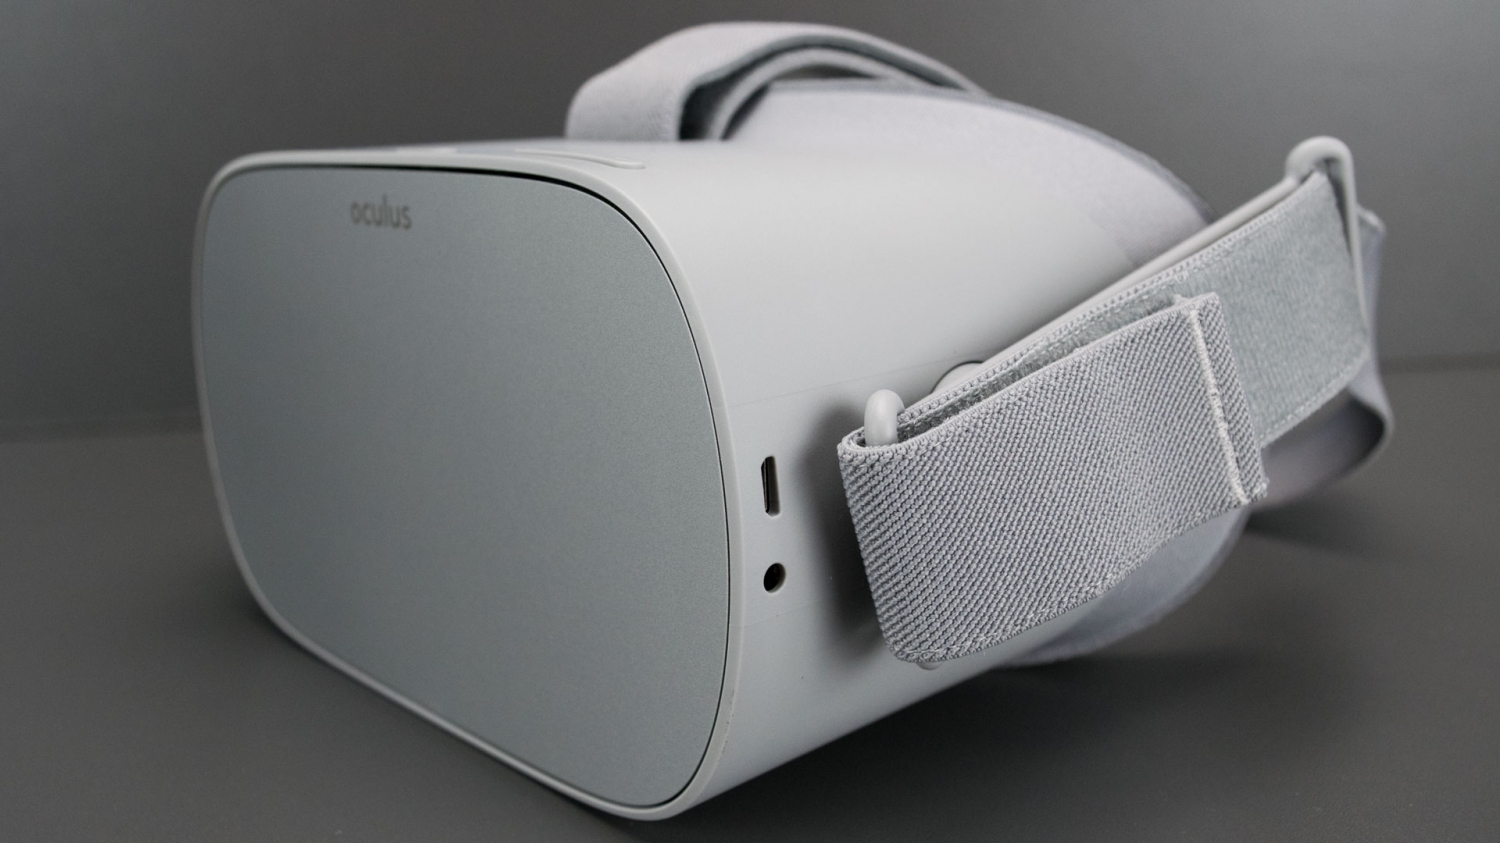 Facebook is going to unlock the Oculus Go OS so it can live forever